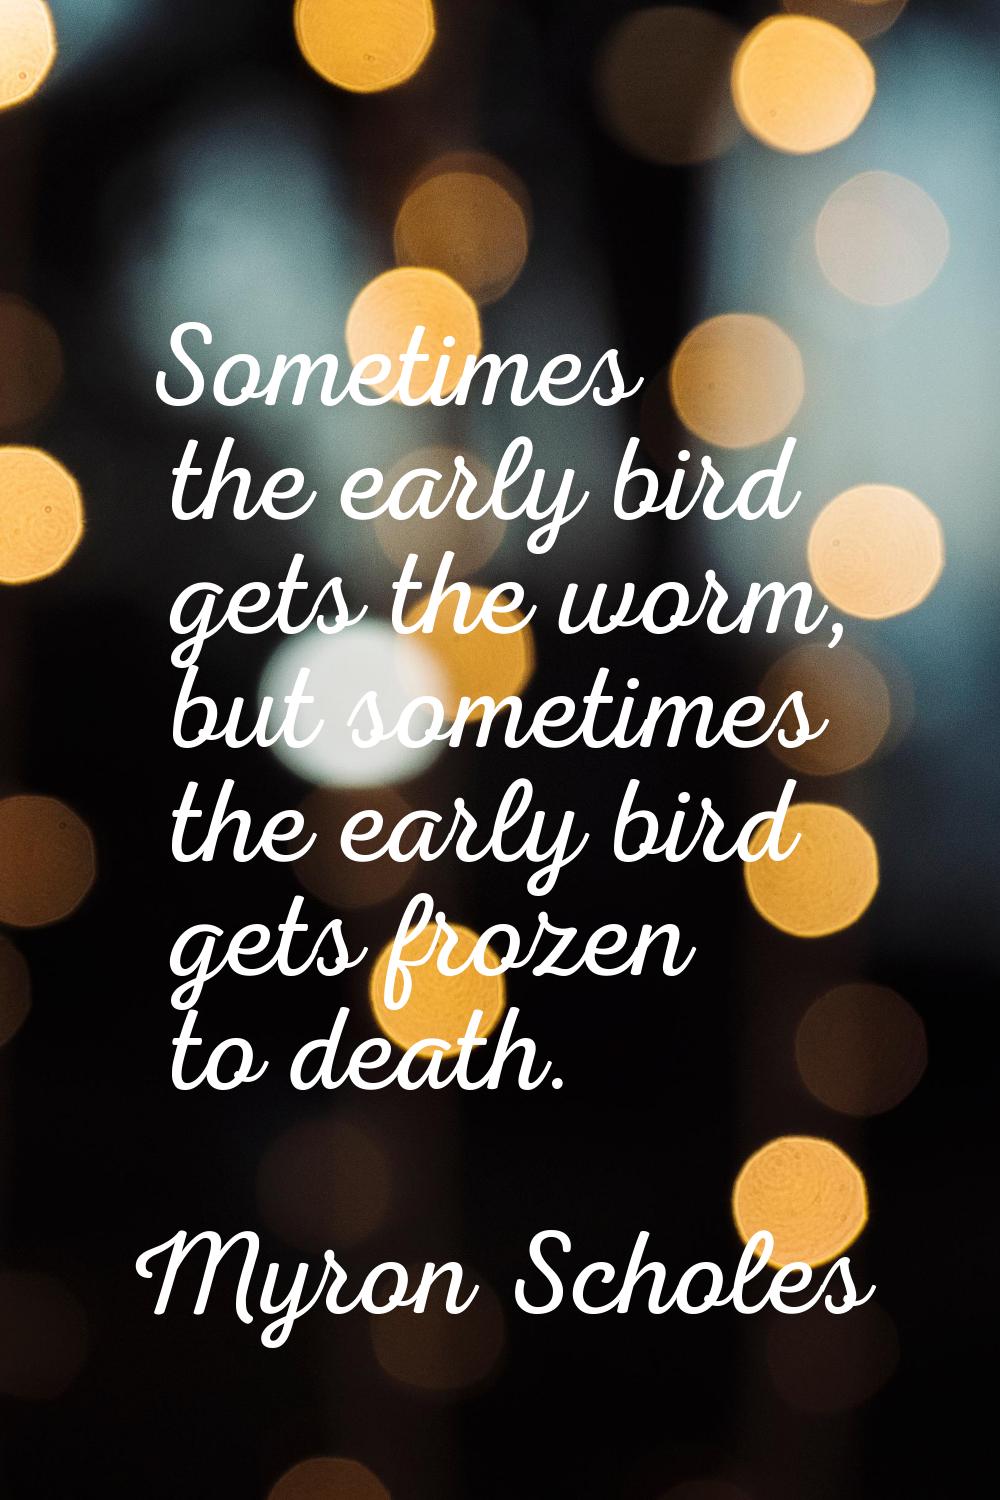 Sometimes the early bird gets the worm, but sometimes the early bird gets frozen to death.